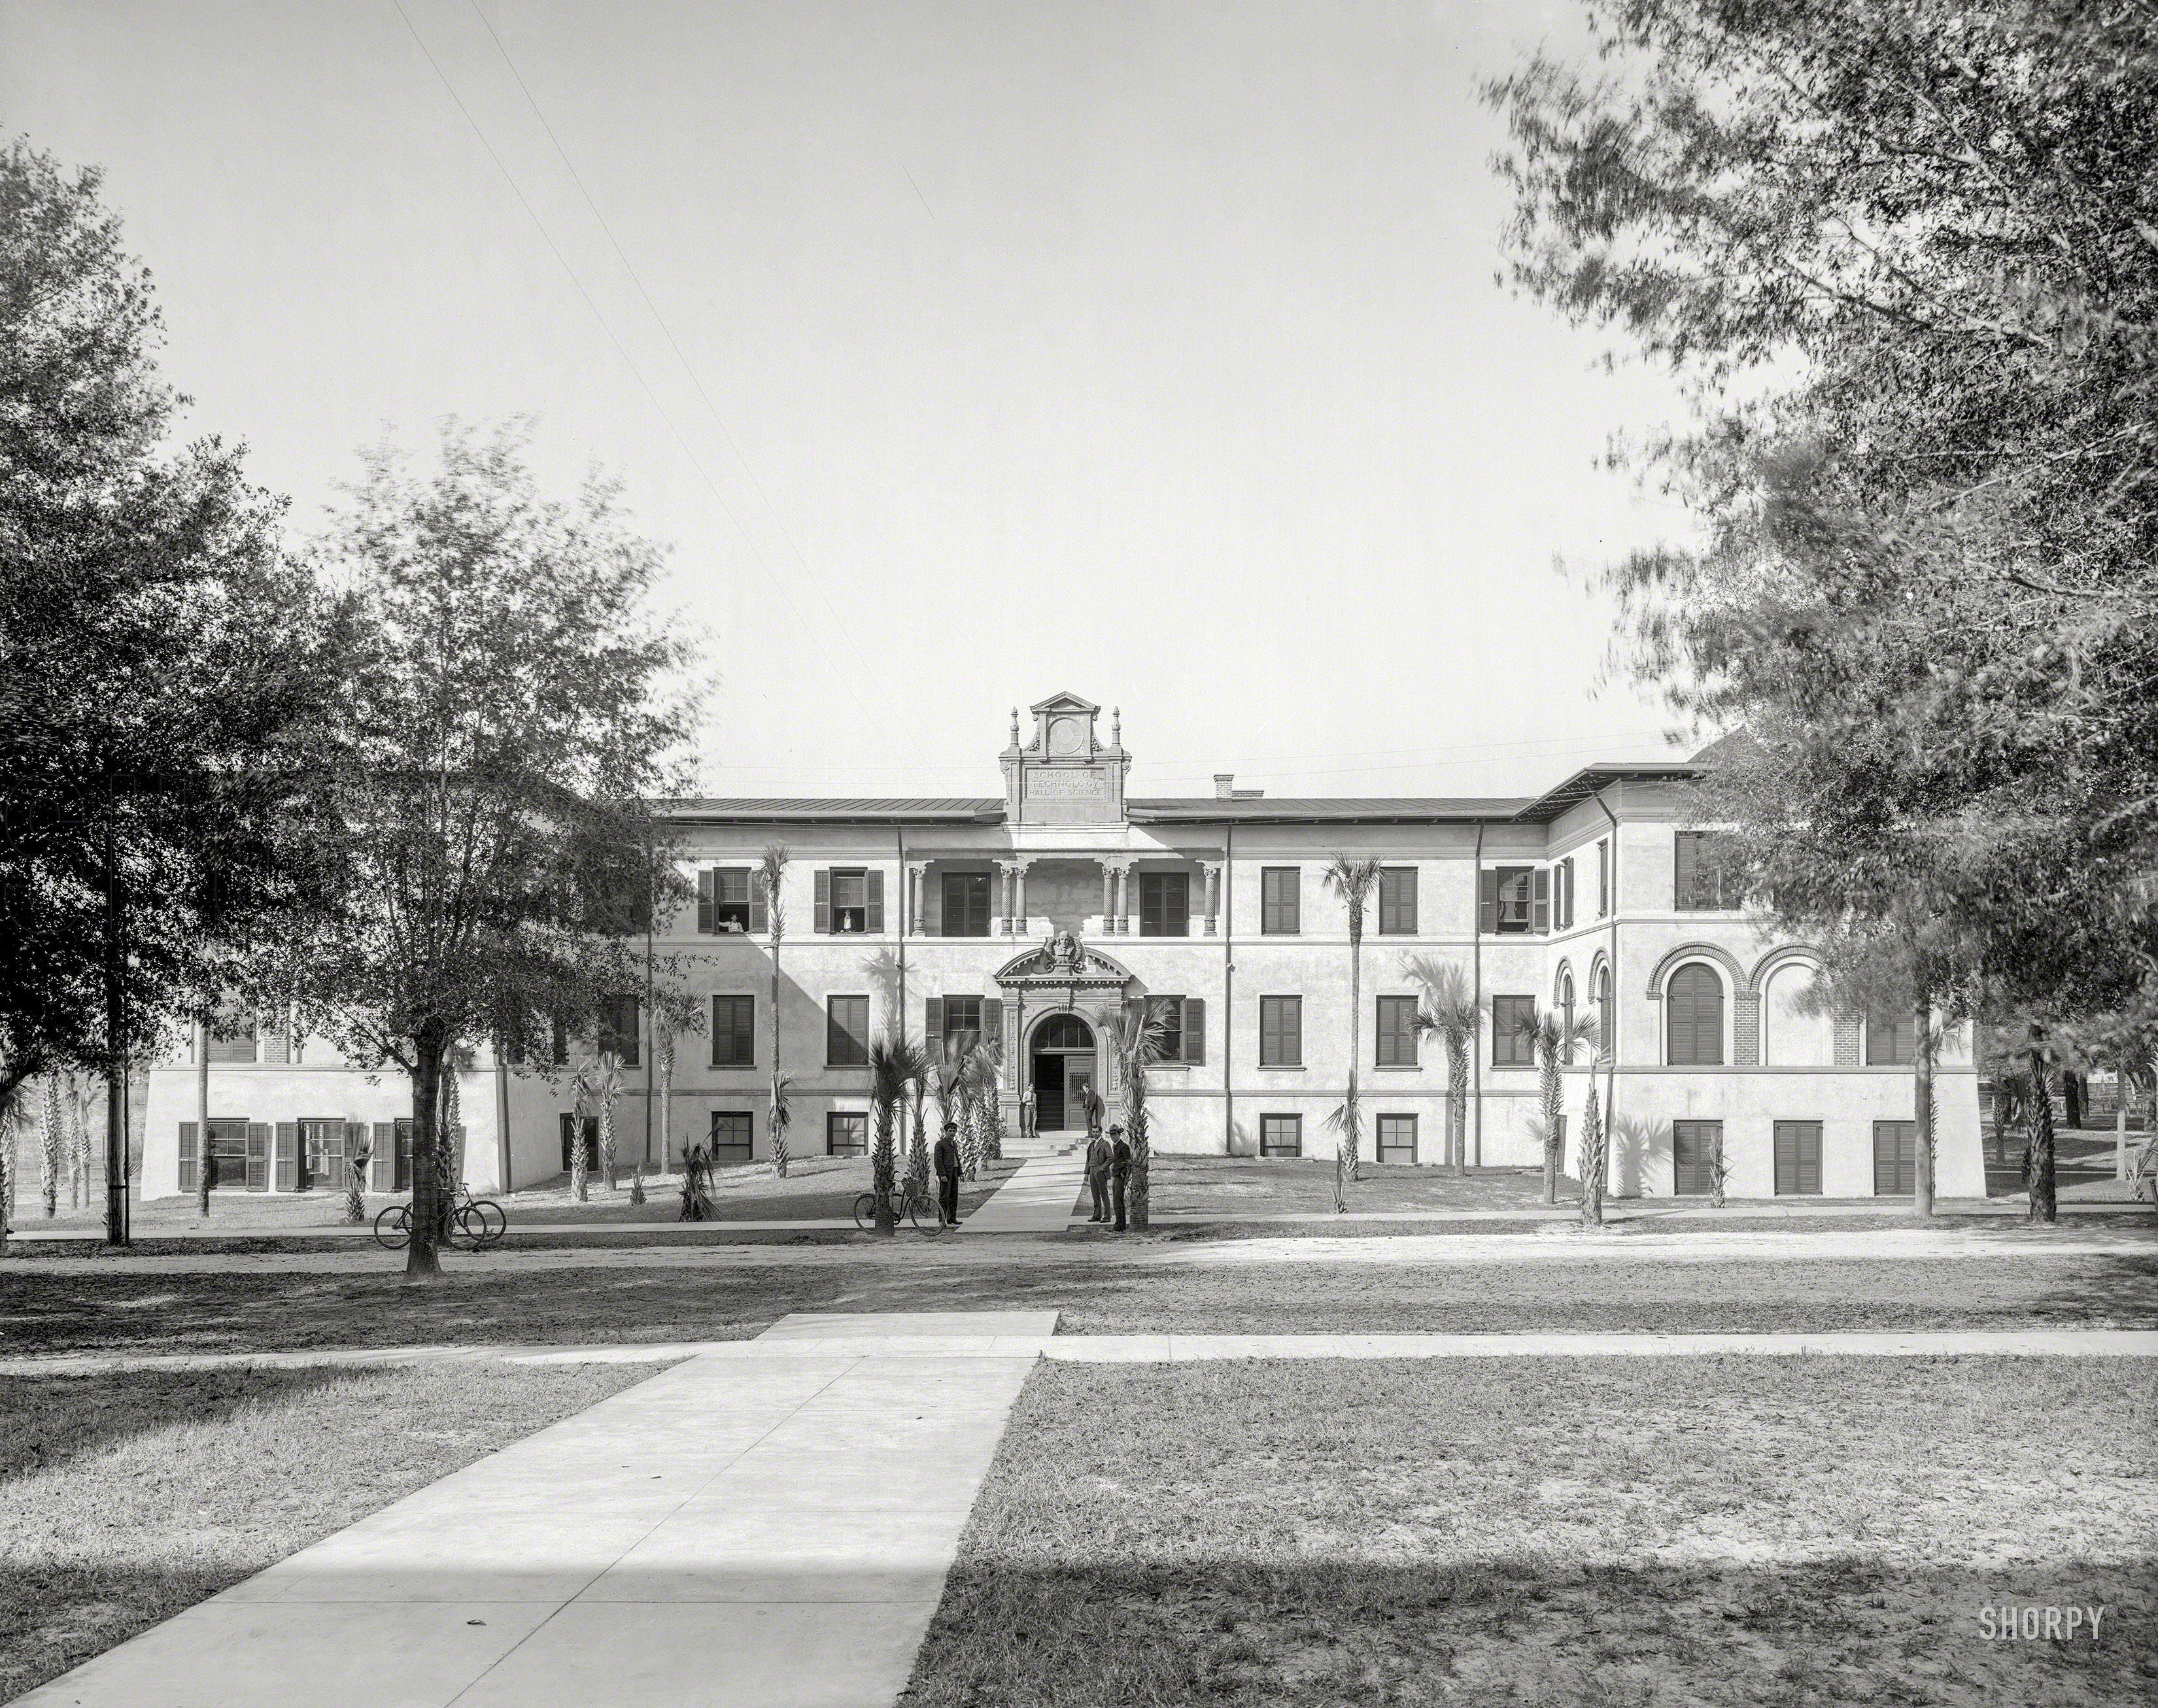 DeLand, Florida, circa 1904. "School of Technology and Hall of Science, John B. Stetson University." 8x10 inch dry plate glass negative. View full size.